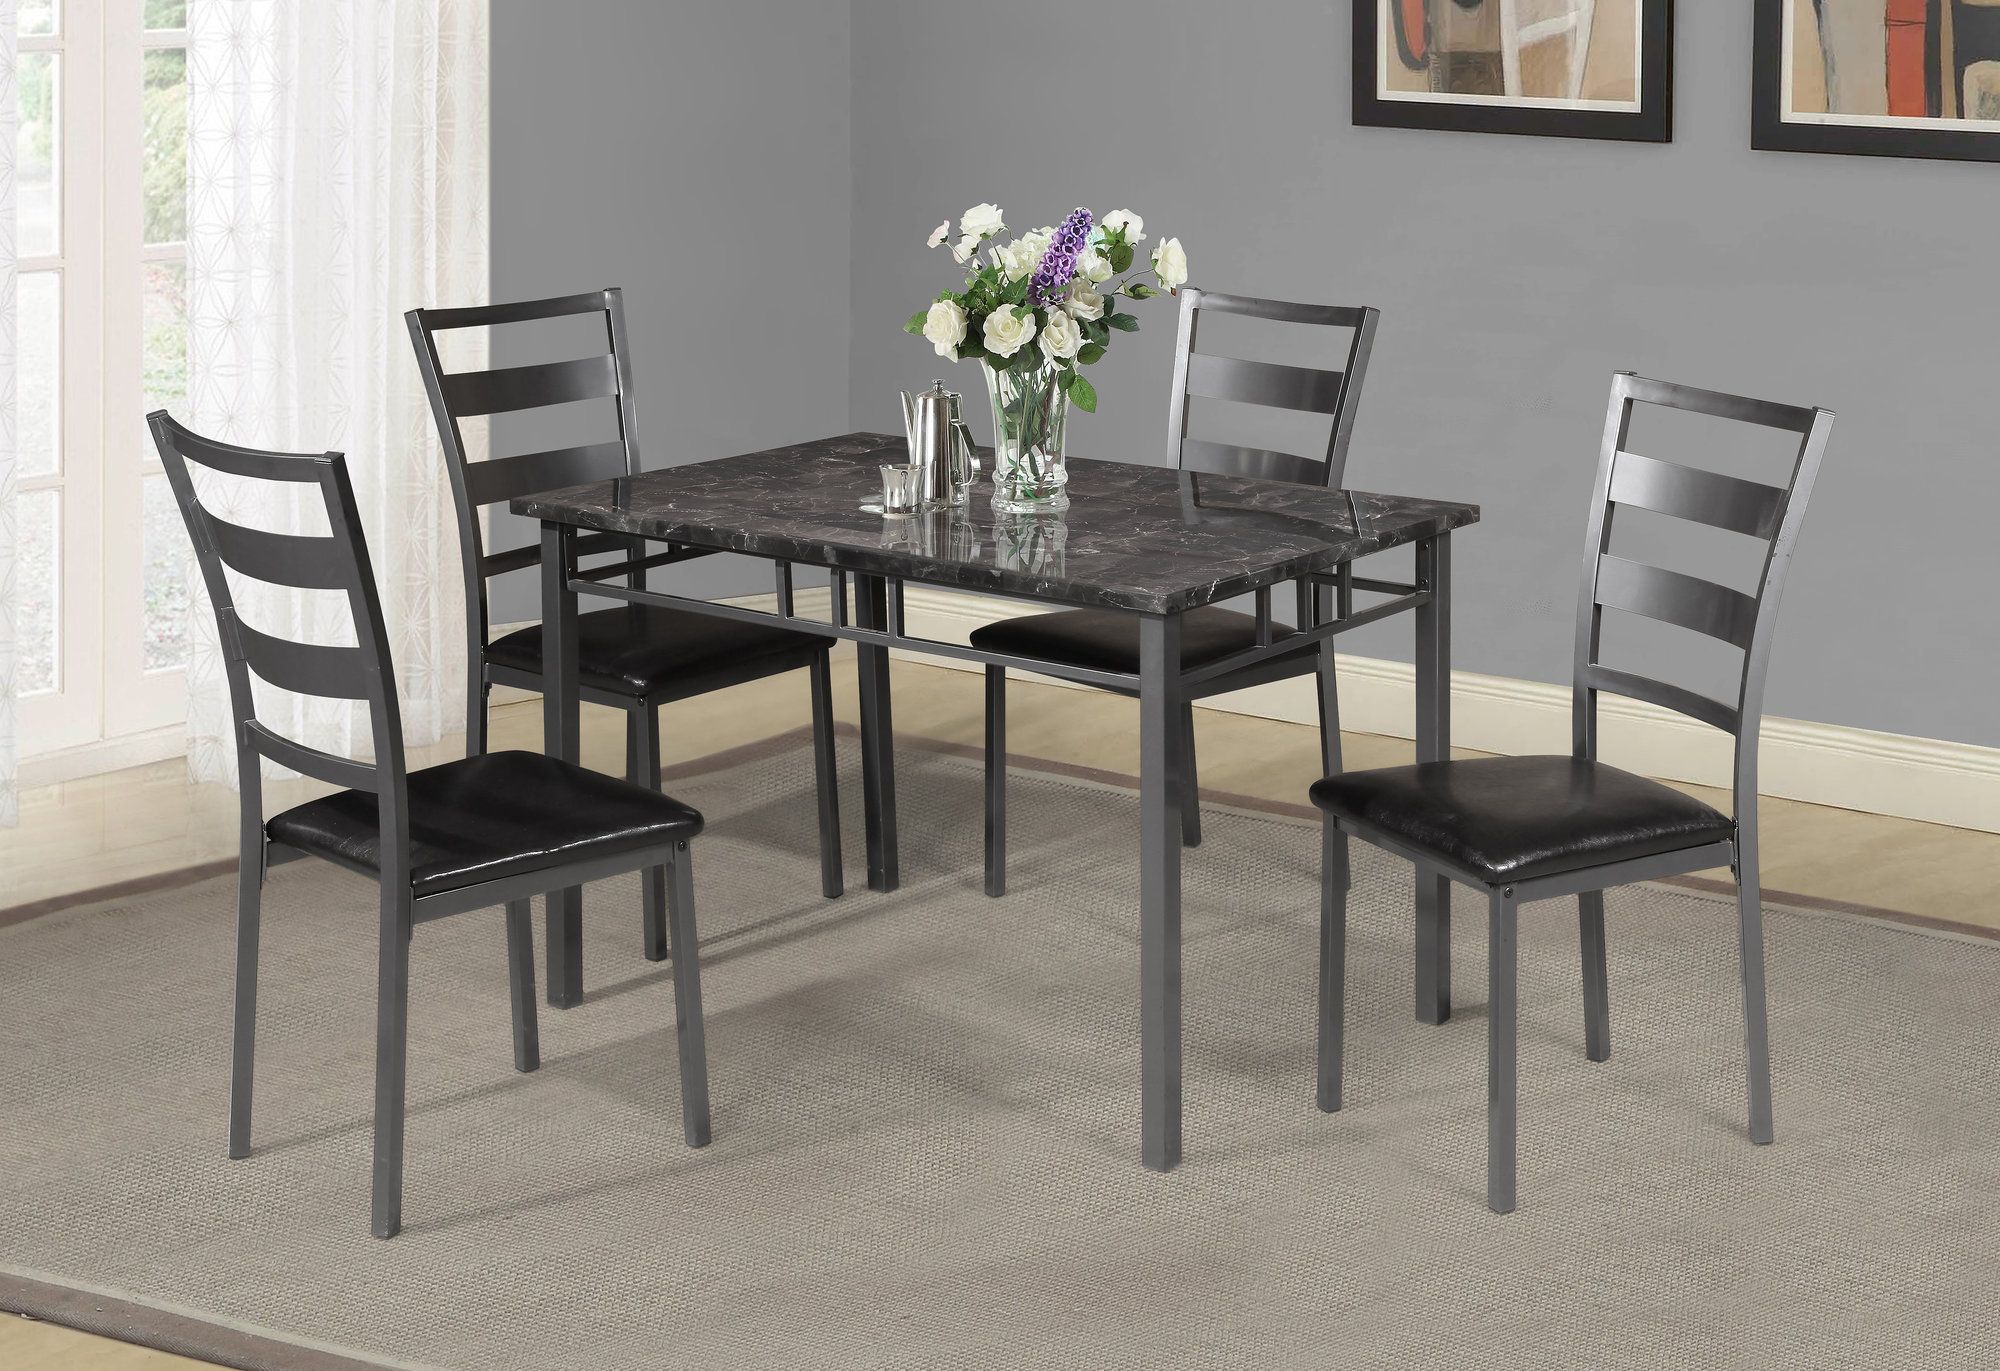 Details About Winston Porter Berke 5 Piece Dining Set With Regard To Most Recently Released Tavarez 5 Piece Dining Sets (View 5 of 20)